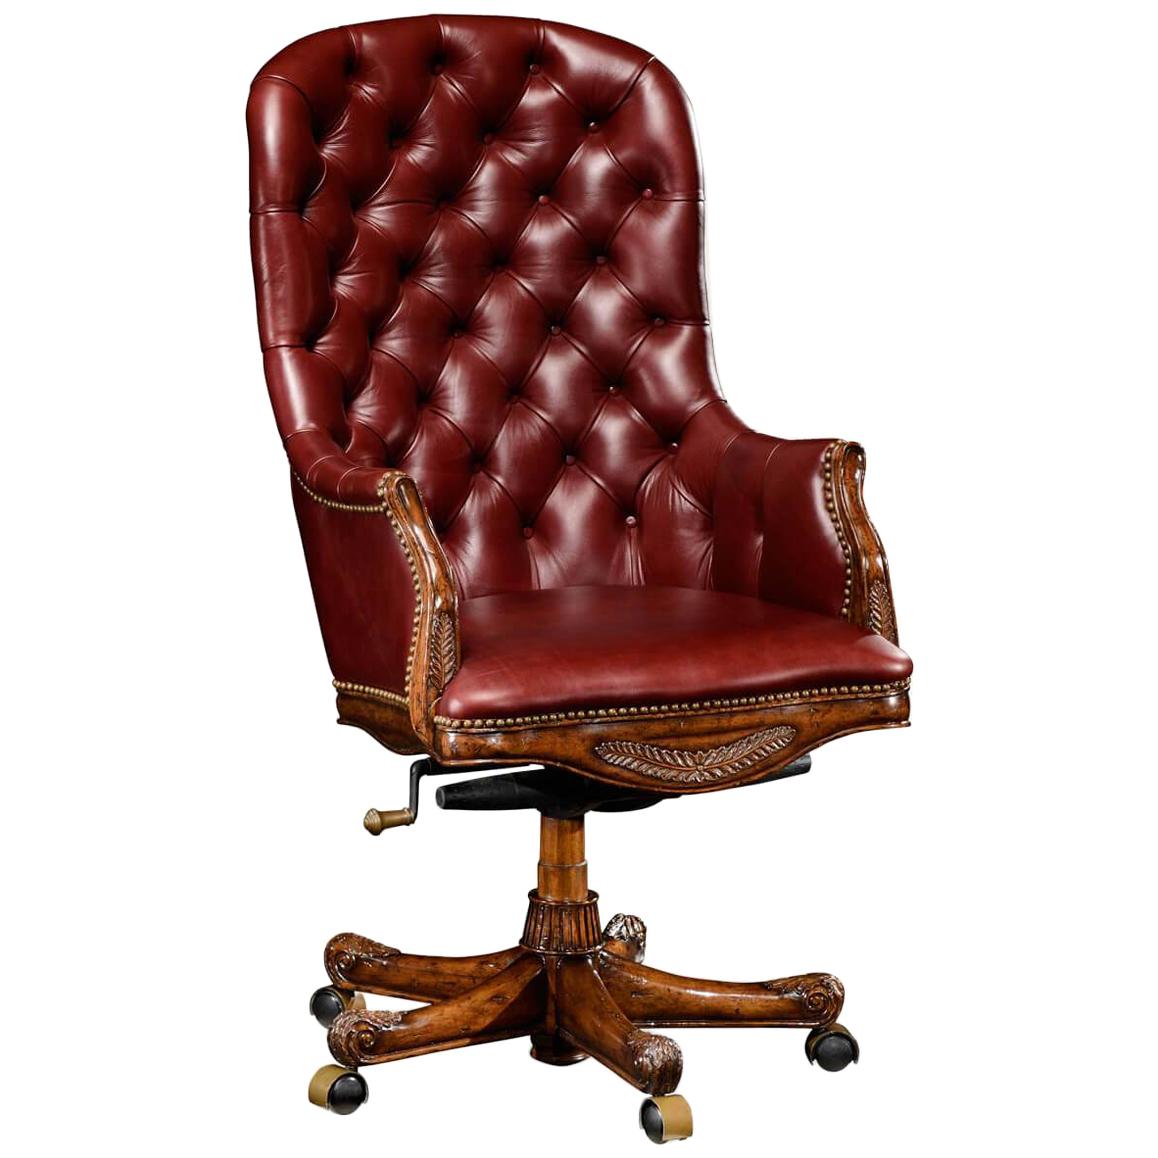 Tufted Leather Mahogany Desk Chair